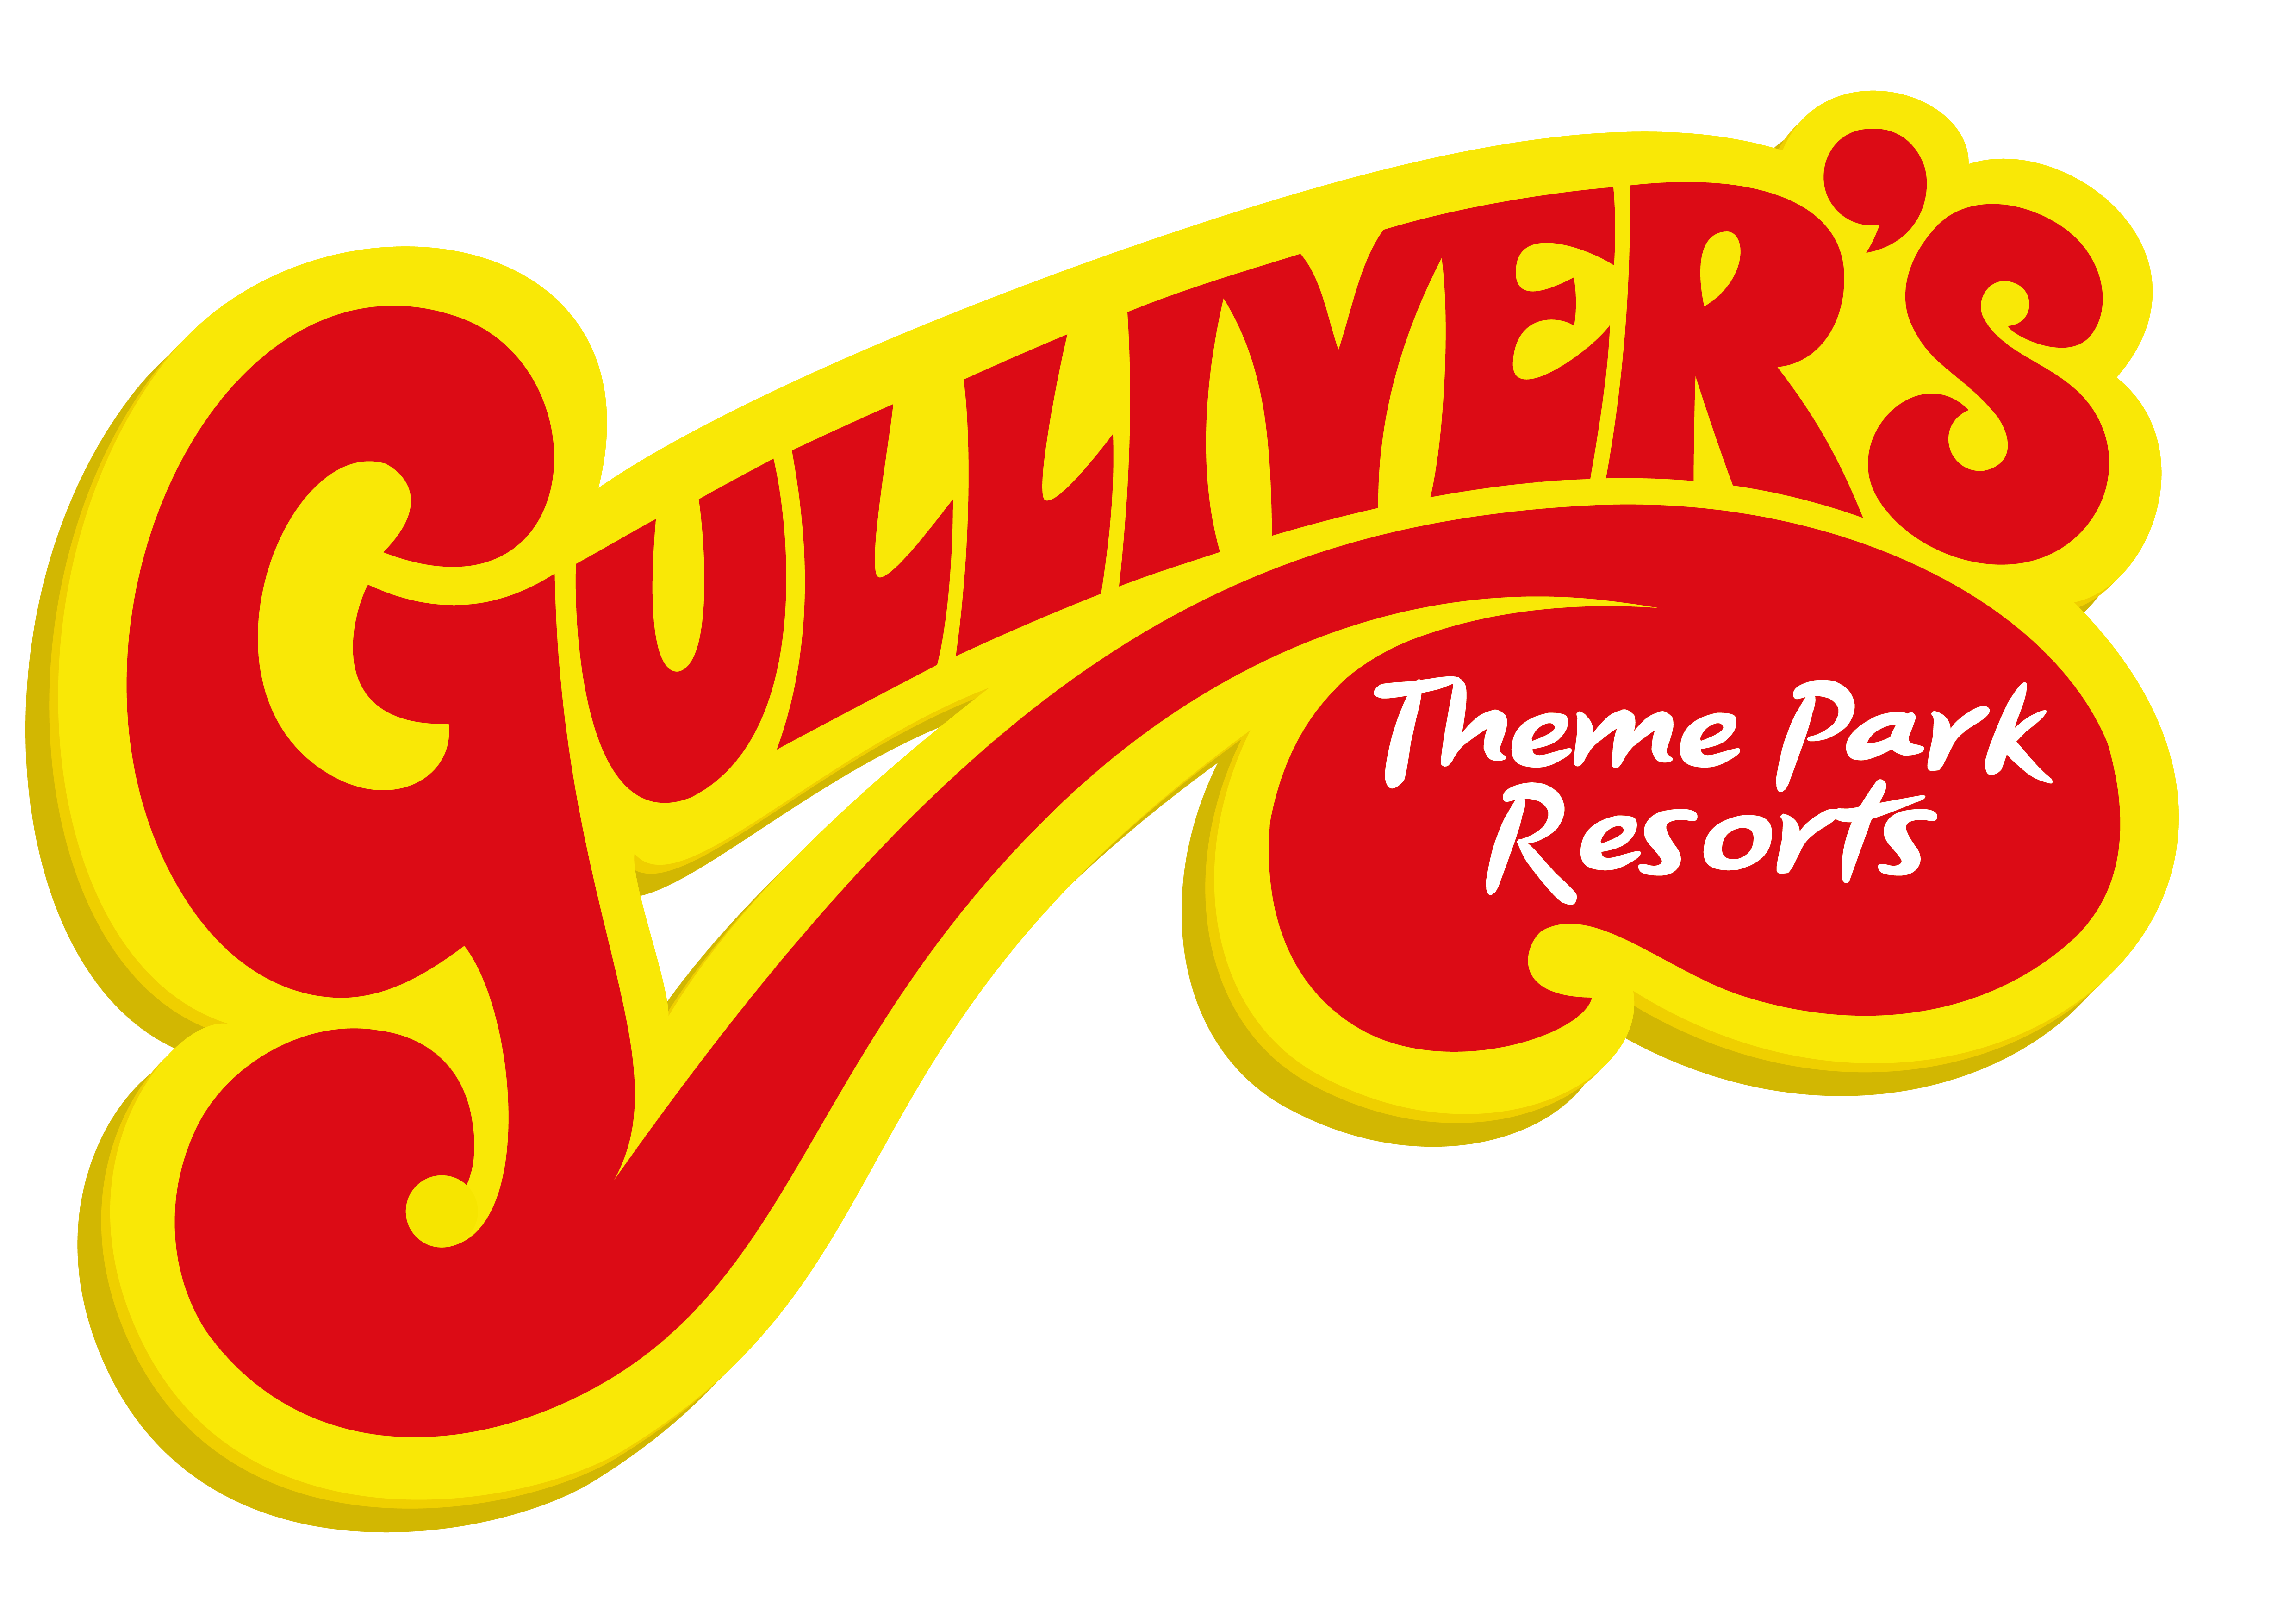 Job opportunity: Theme Park Trainee Manager – Graduate Programme, England, UK with Gulliver's Theme Park